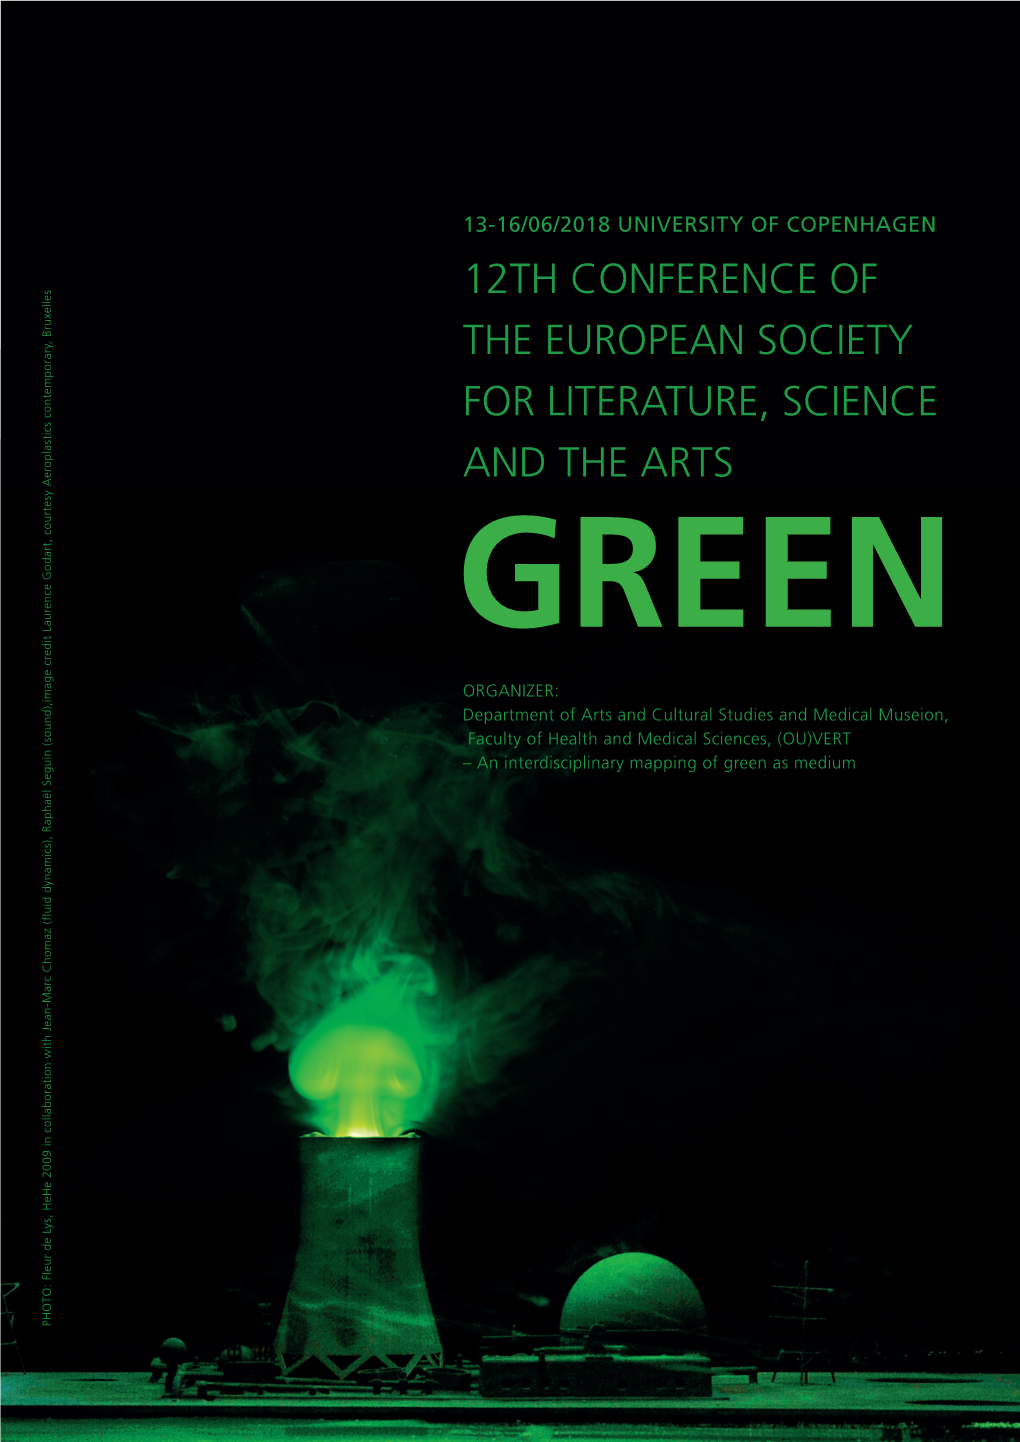 12Th Conference of the European Society for Literature, Science and the Arts Green